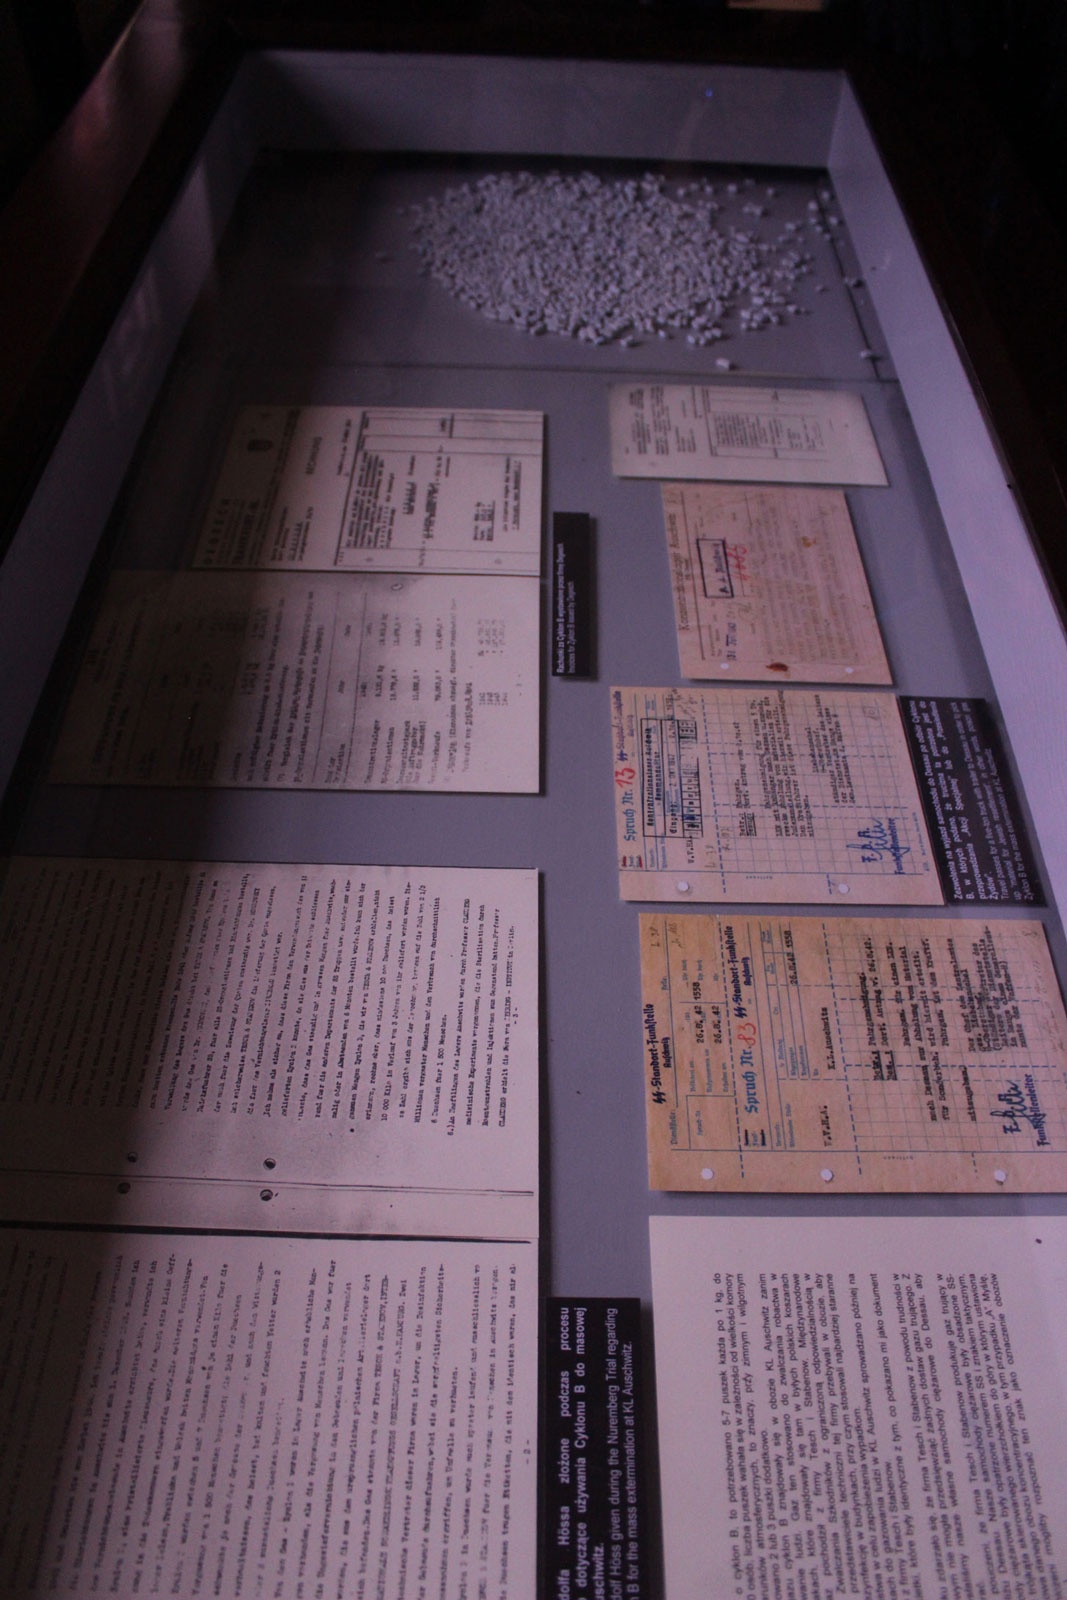 Zyklon B and several documents